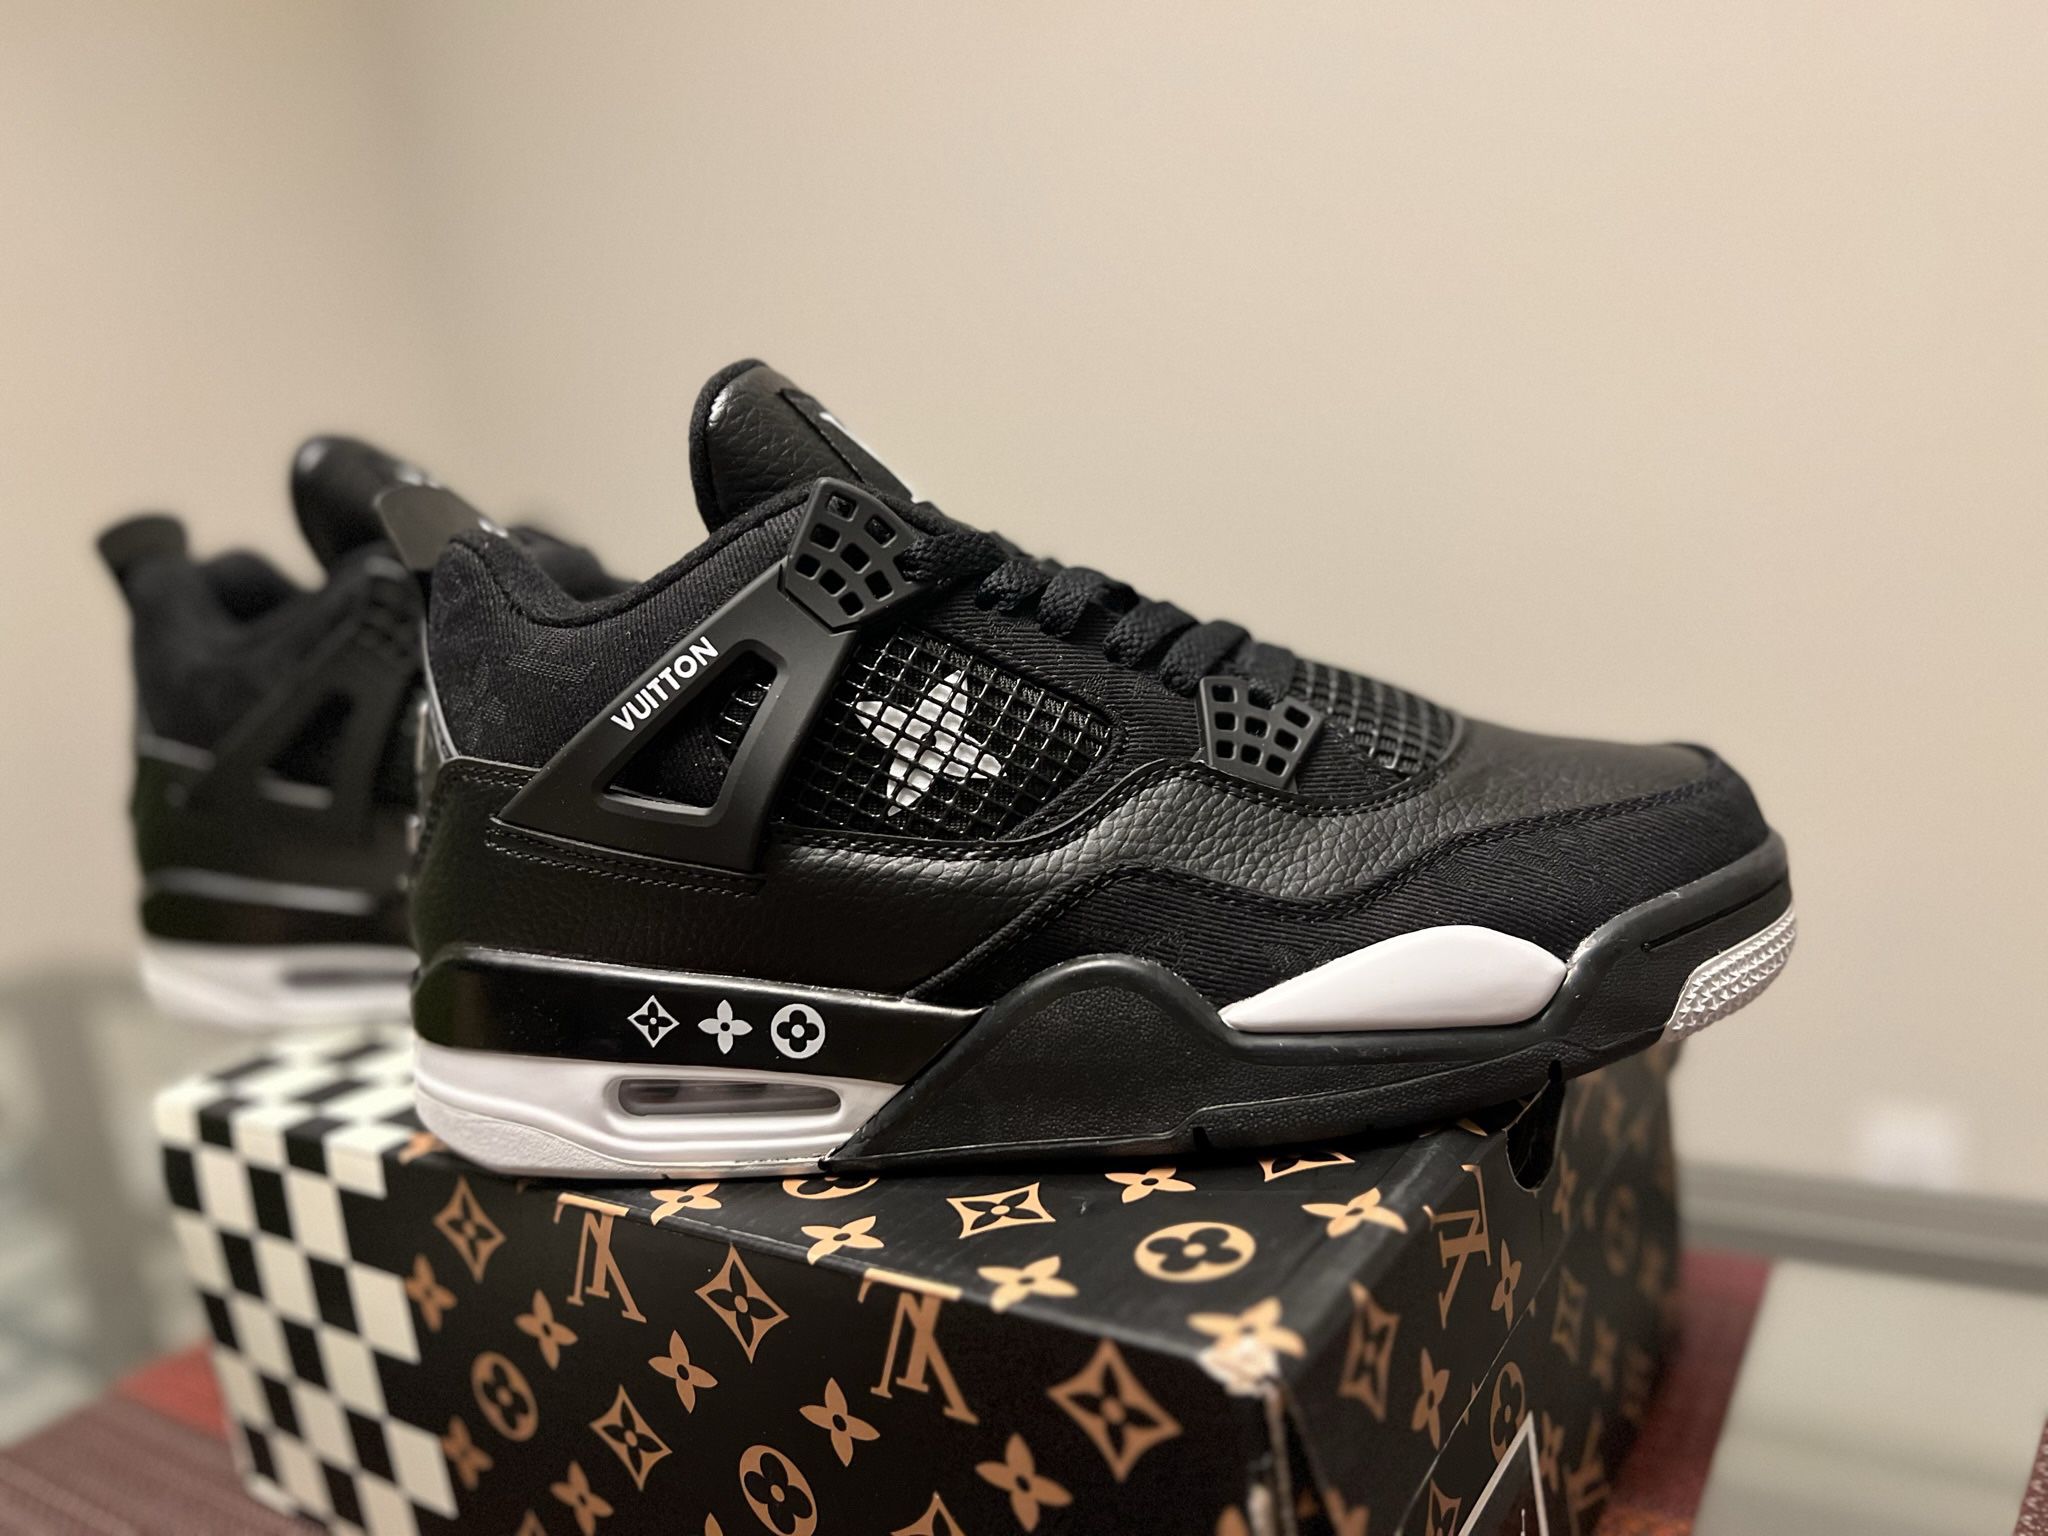 LOUIS VUITTON LV AIR JORDAN 4 RETRO NAVY BLUE WHITE BLACK NEW SNEAKERS  SHOES SIZE 8.5 42 A4 for Sale in Miami, FL - OfferUp